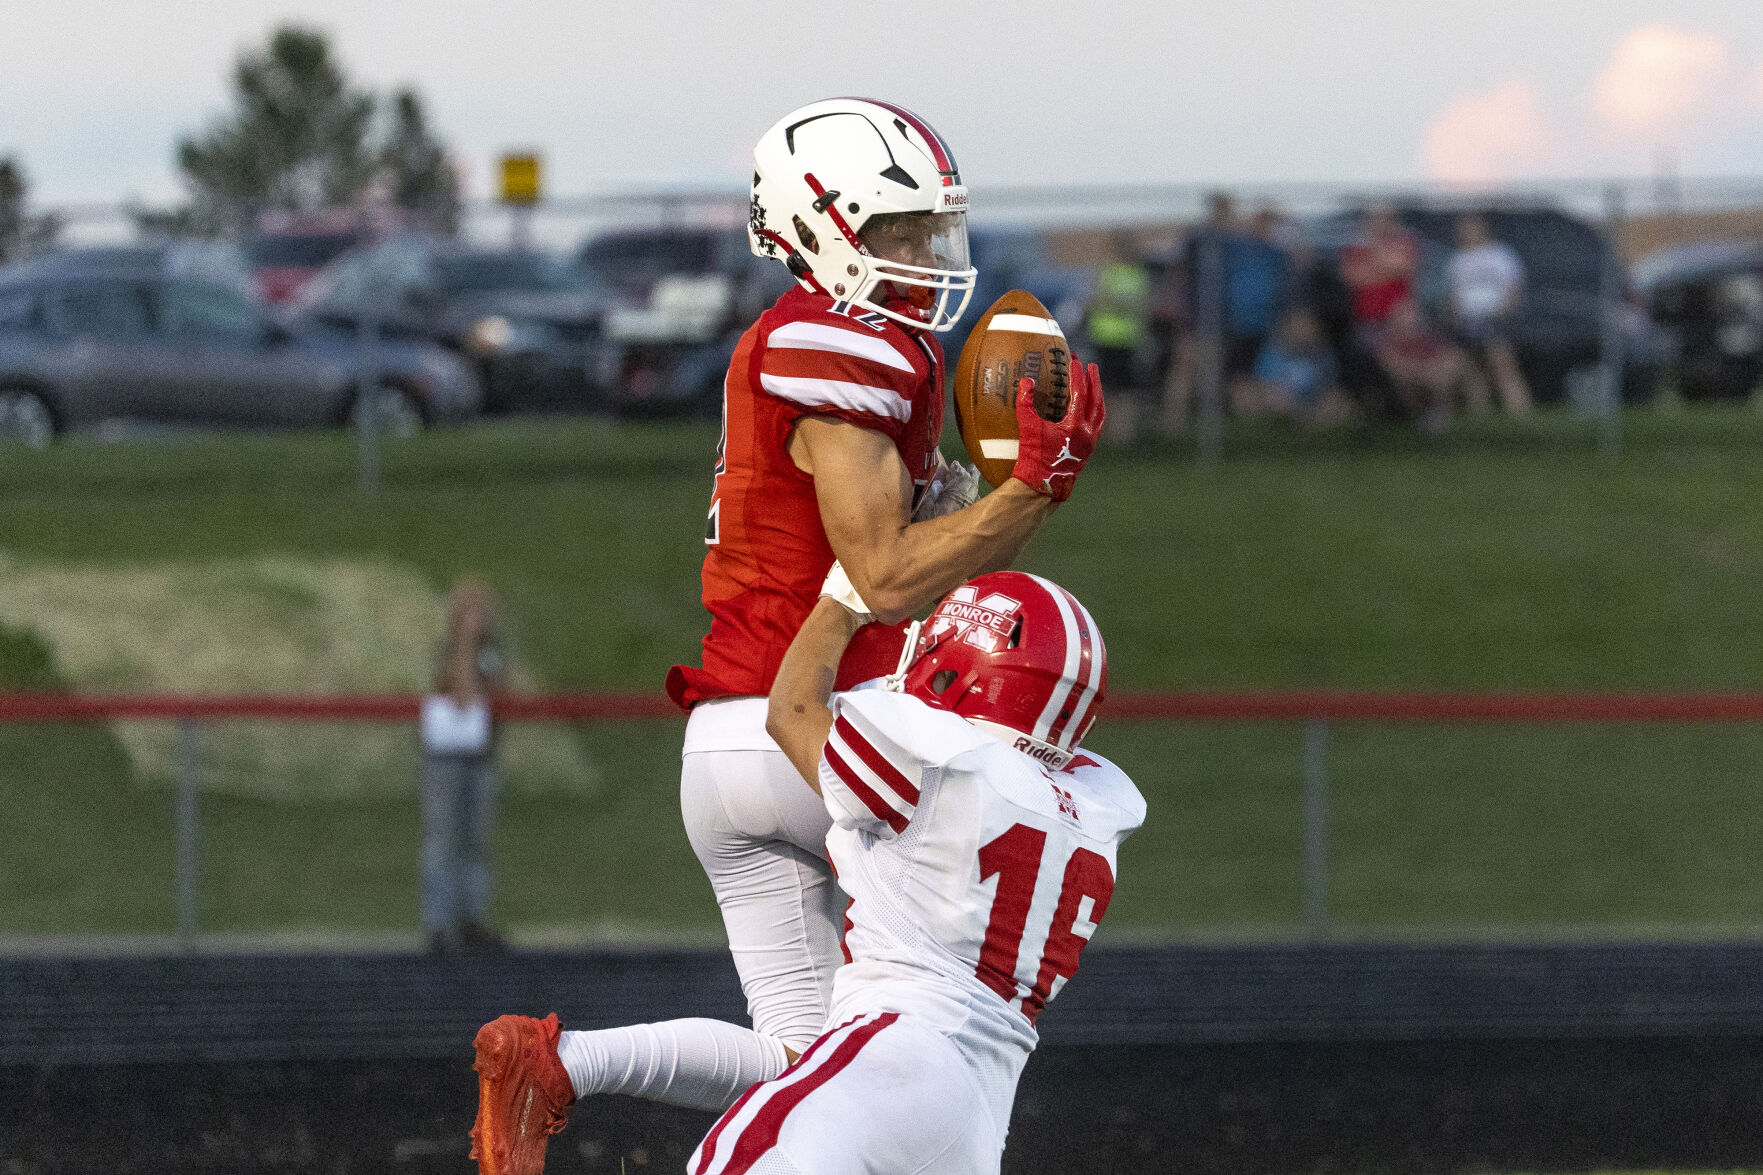 Mount Horeb/Barneveld dominates Monroe with strong offense and stellar defense